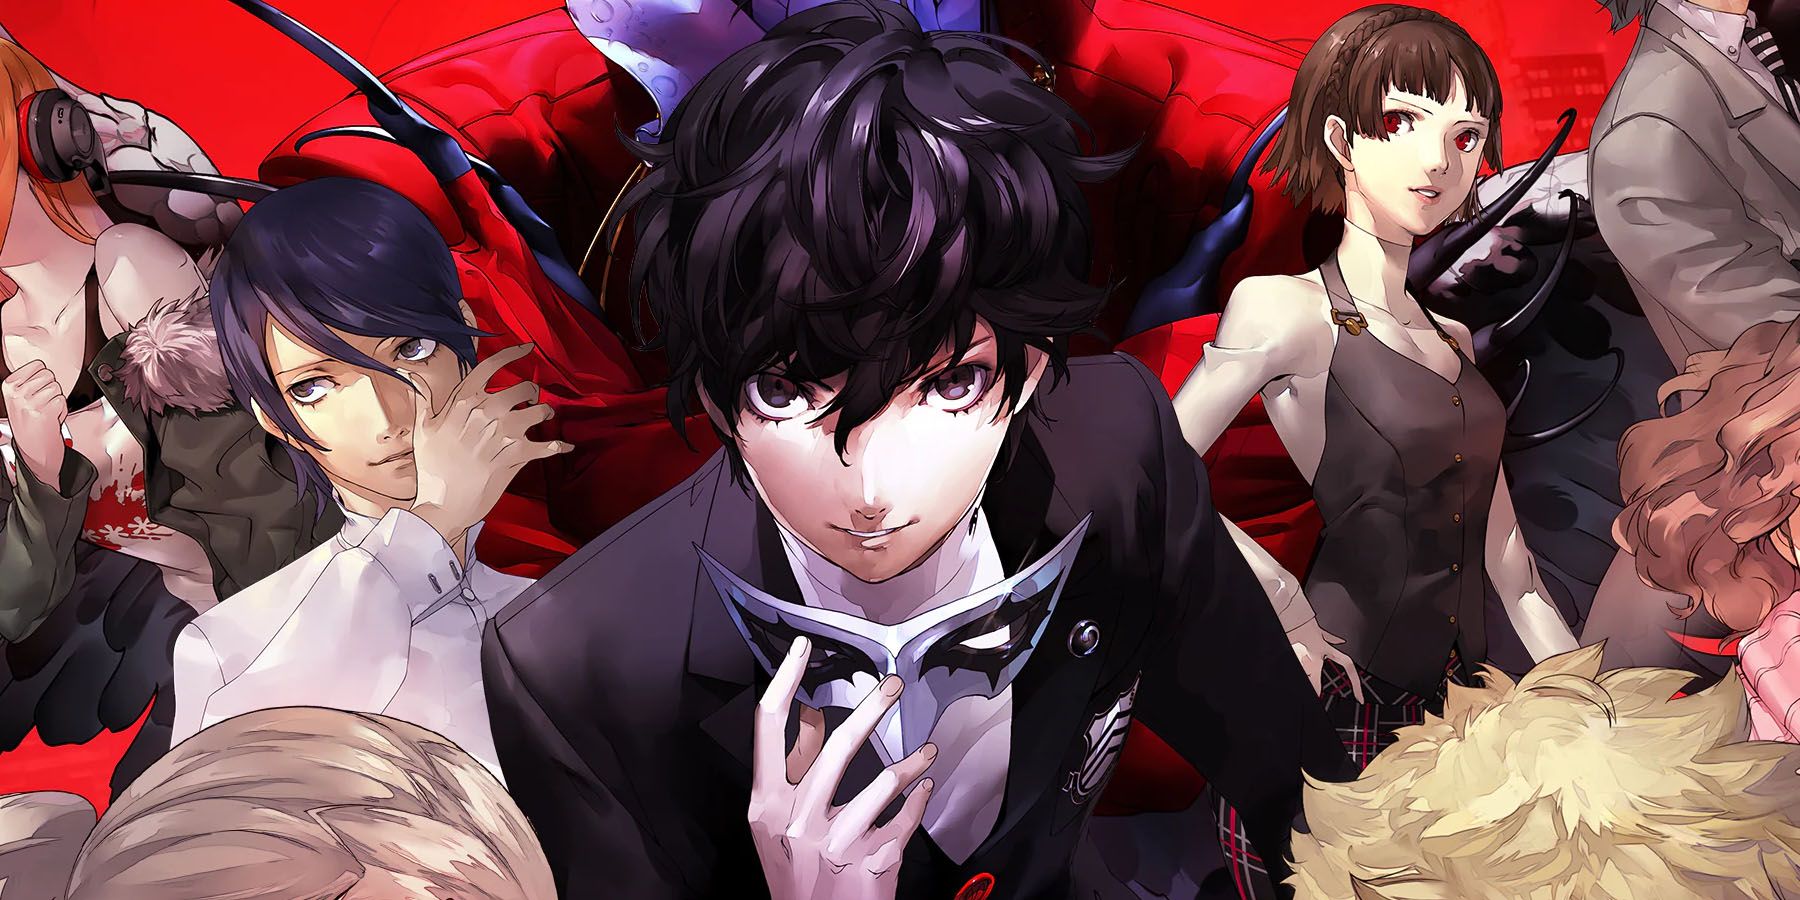 Persona 5 has sold 2 million copies worldwide, the highest sales